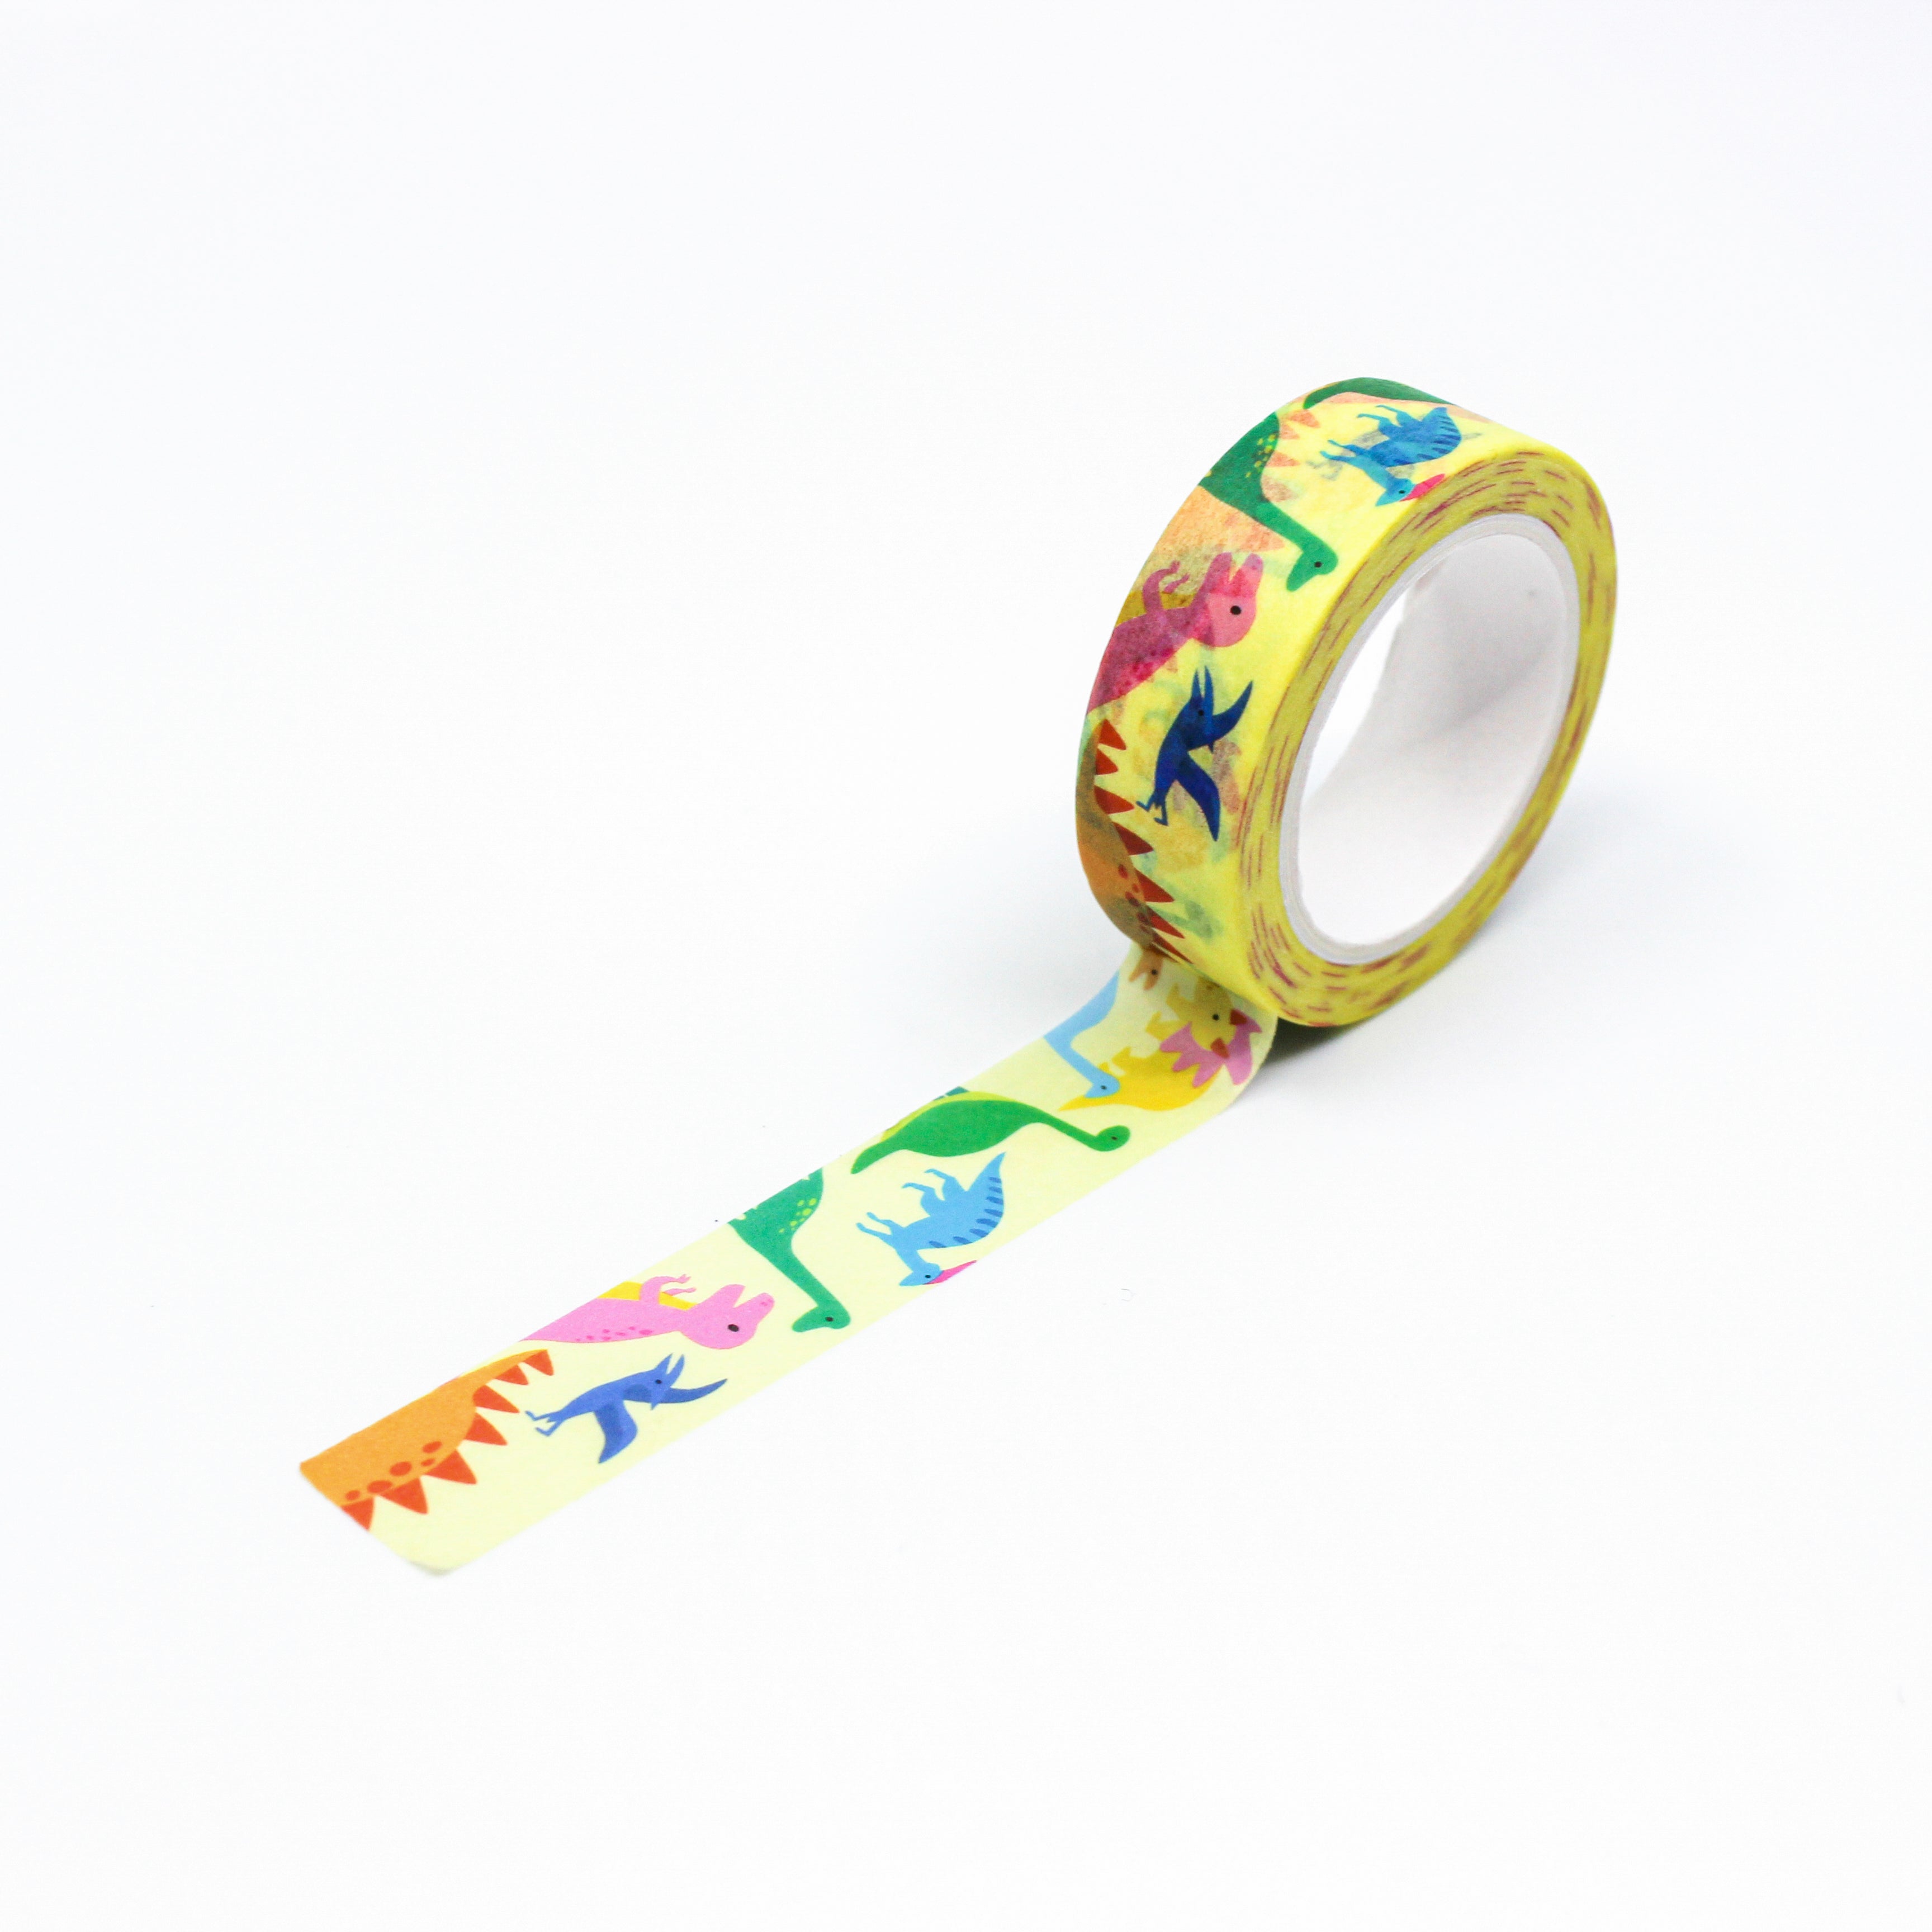 This is a full pattern repeat view of colorful dinosaurs themed washi tape from BBB Supplies Craft Shop